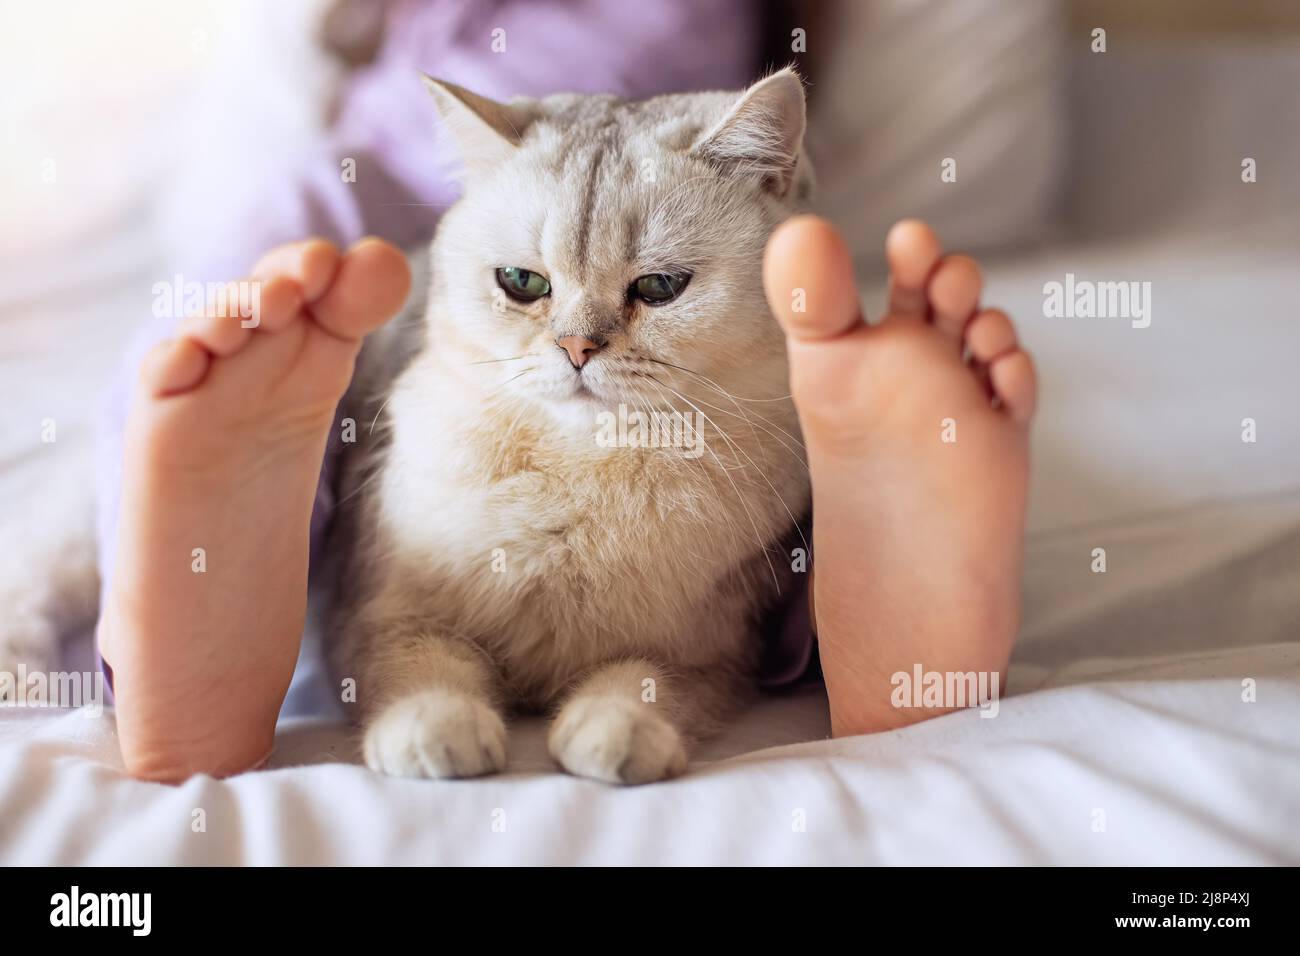 Cute white British cat, resting at home on the bed, between barefoot childrens feet. Stock Photo